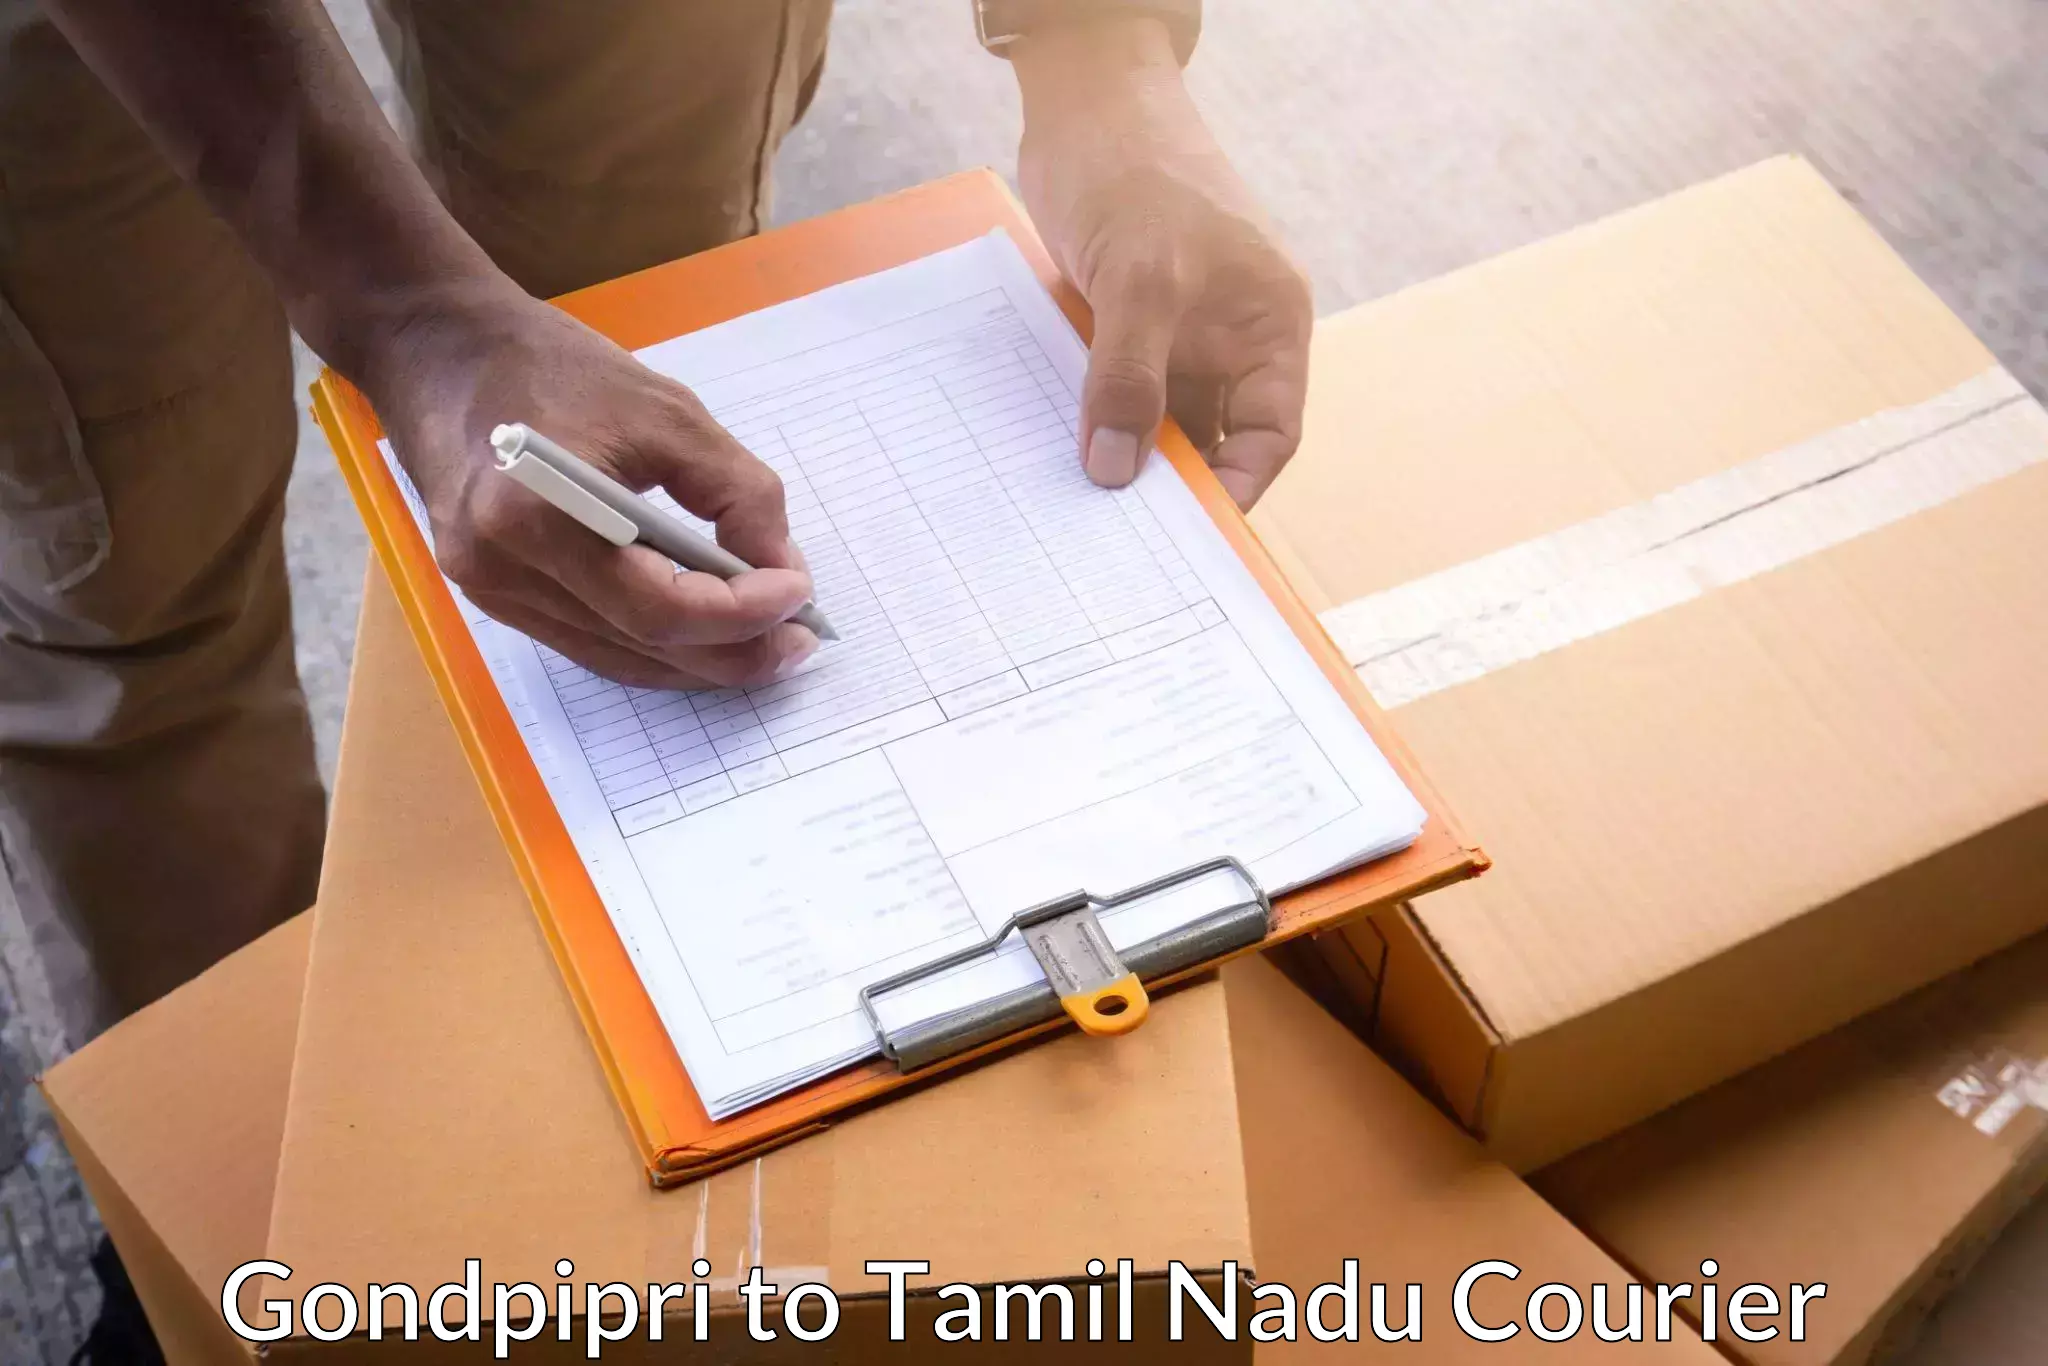 Business logistics support in Gondpipri to Coonoor